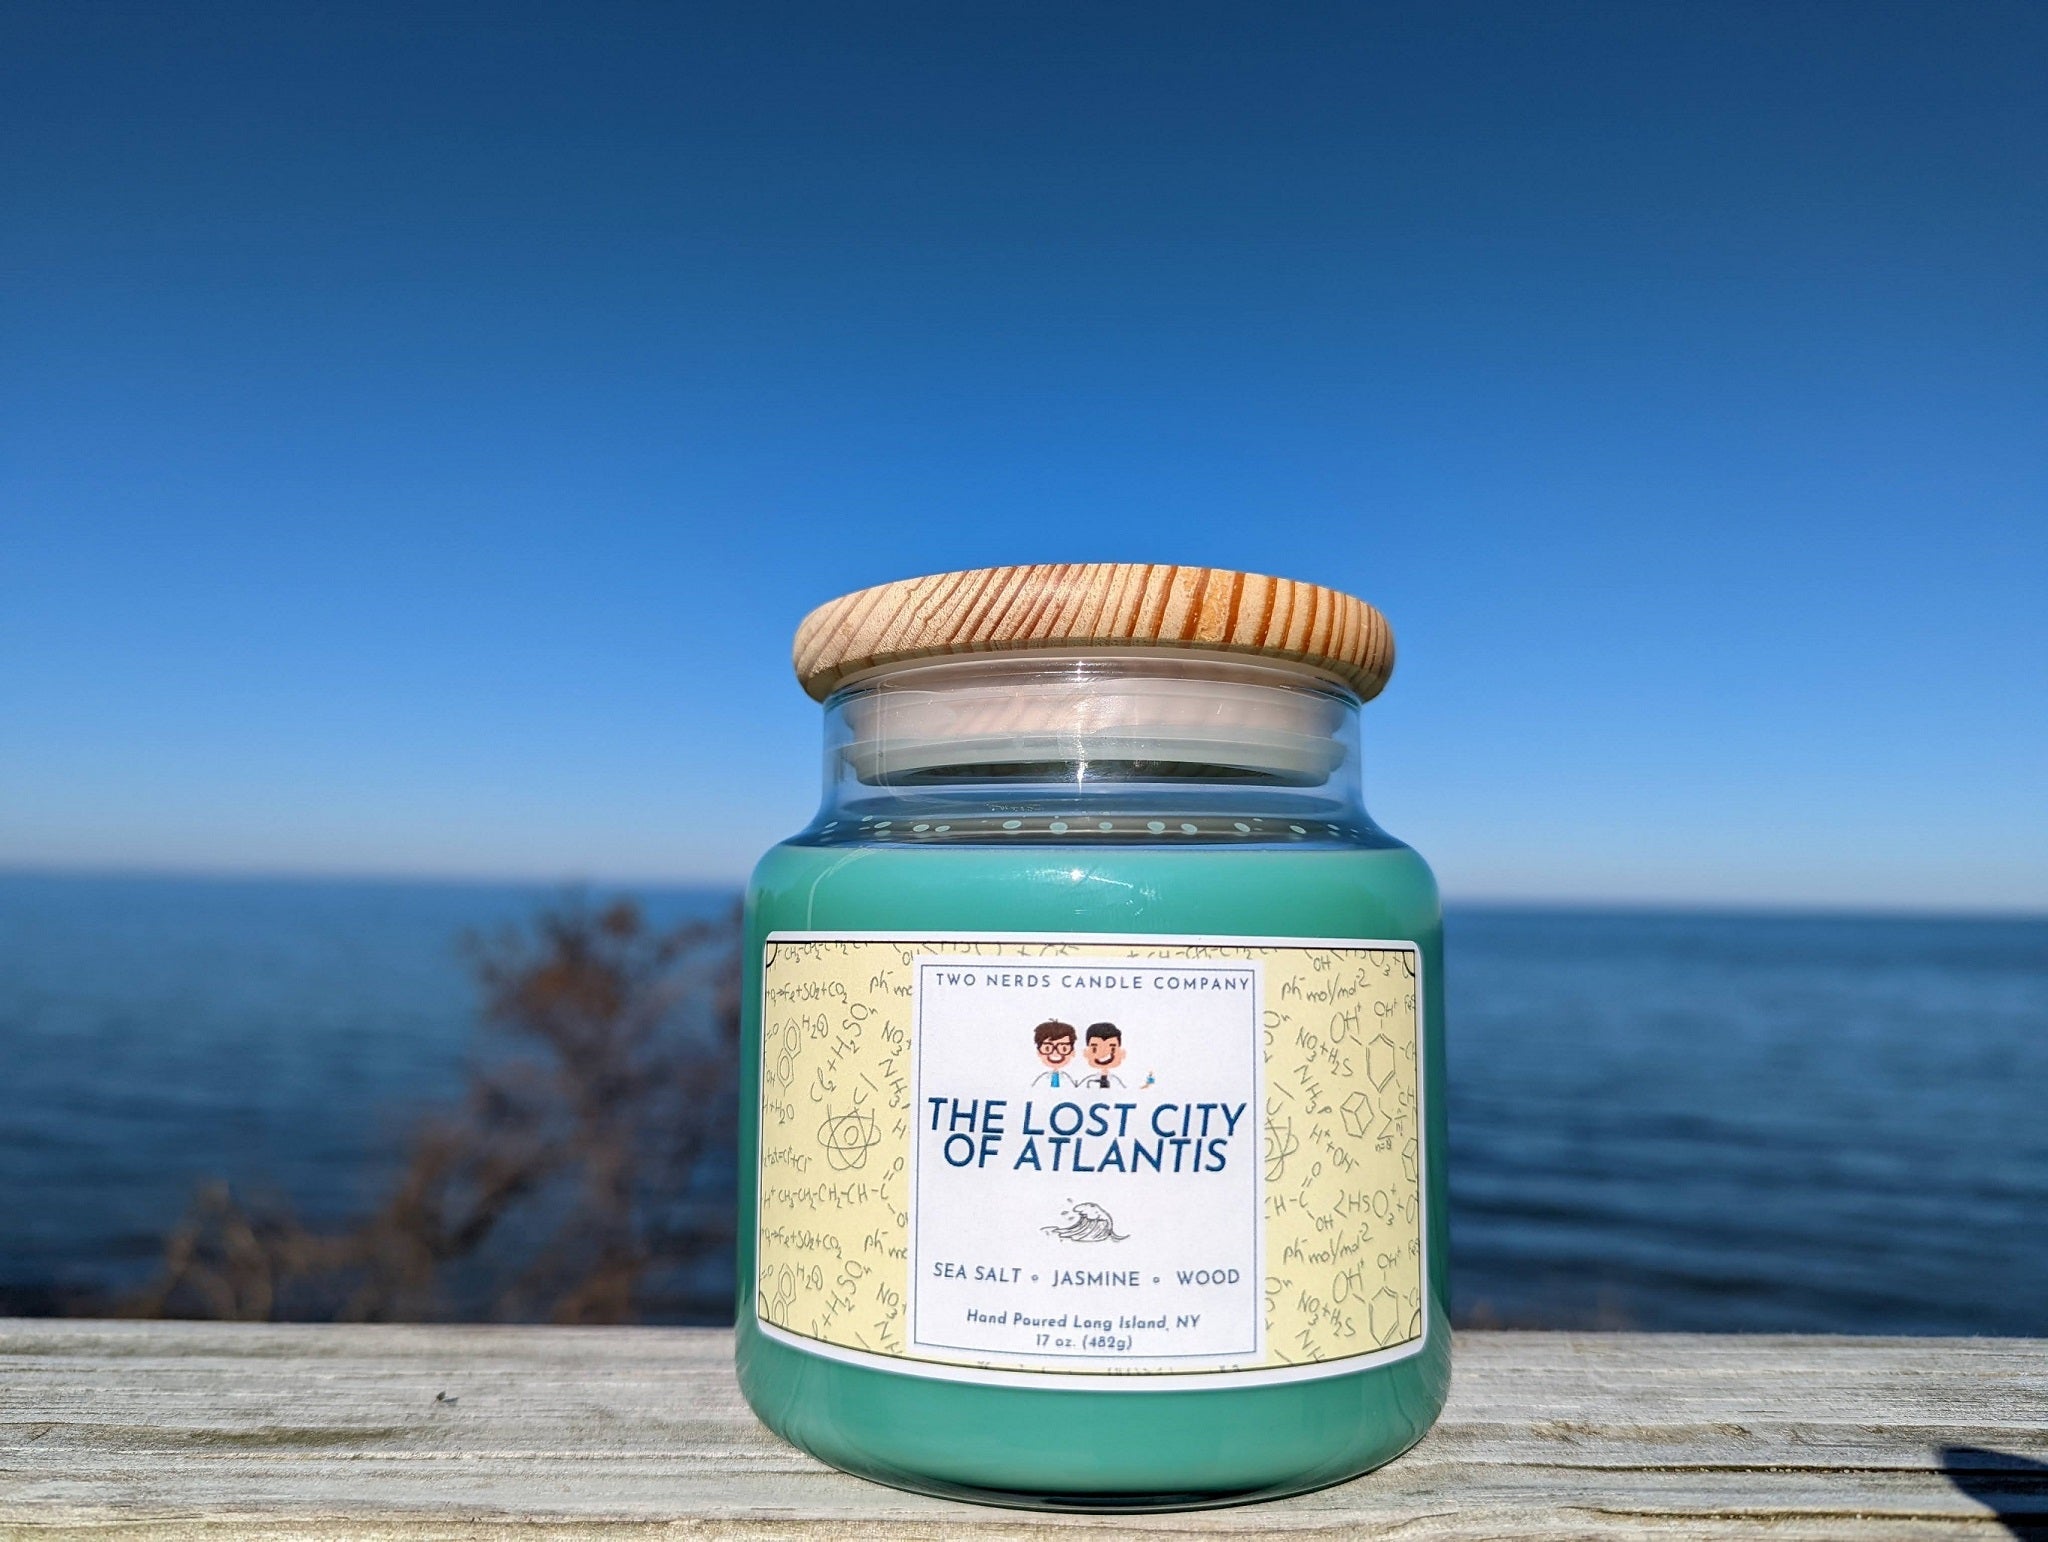 A beach themed soy candle which is placed on a beach background. The aqua colored candle is placed on a wood table with the ocean in the background.